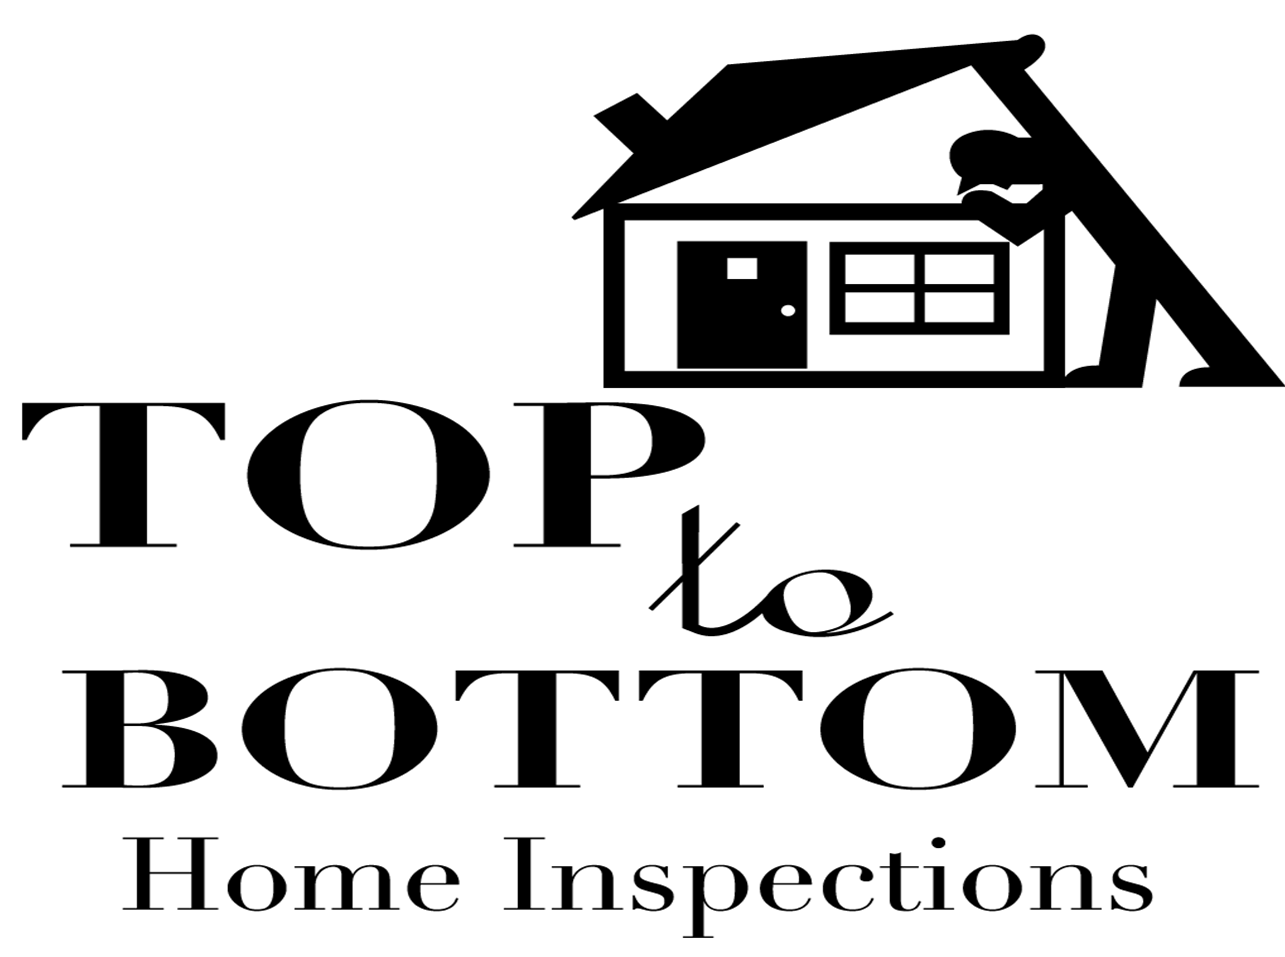 Top To Bottom Home Inspection Services Inc. - Logo